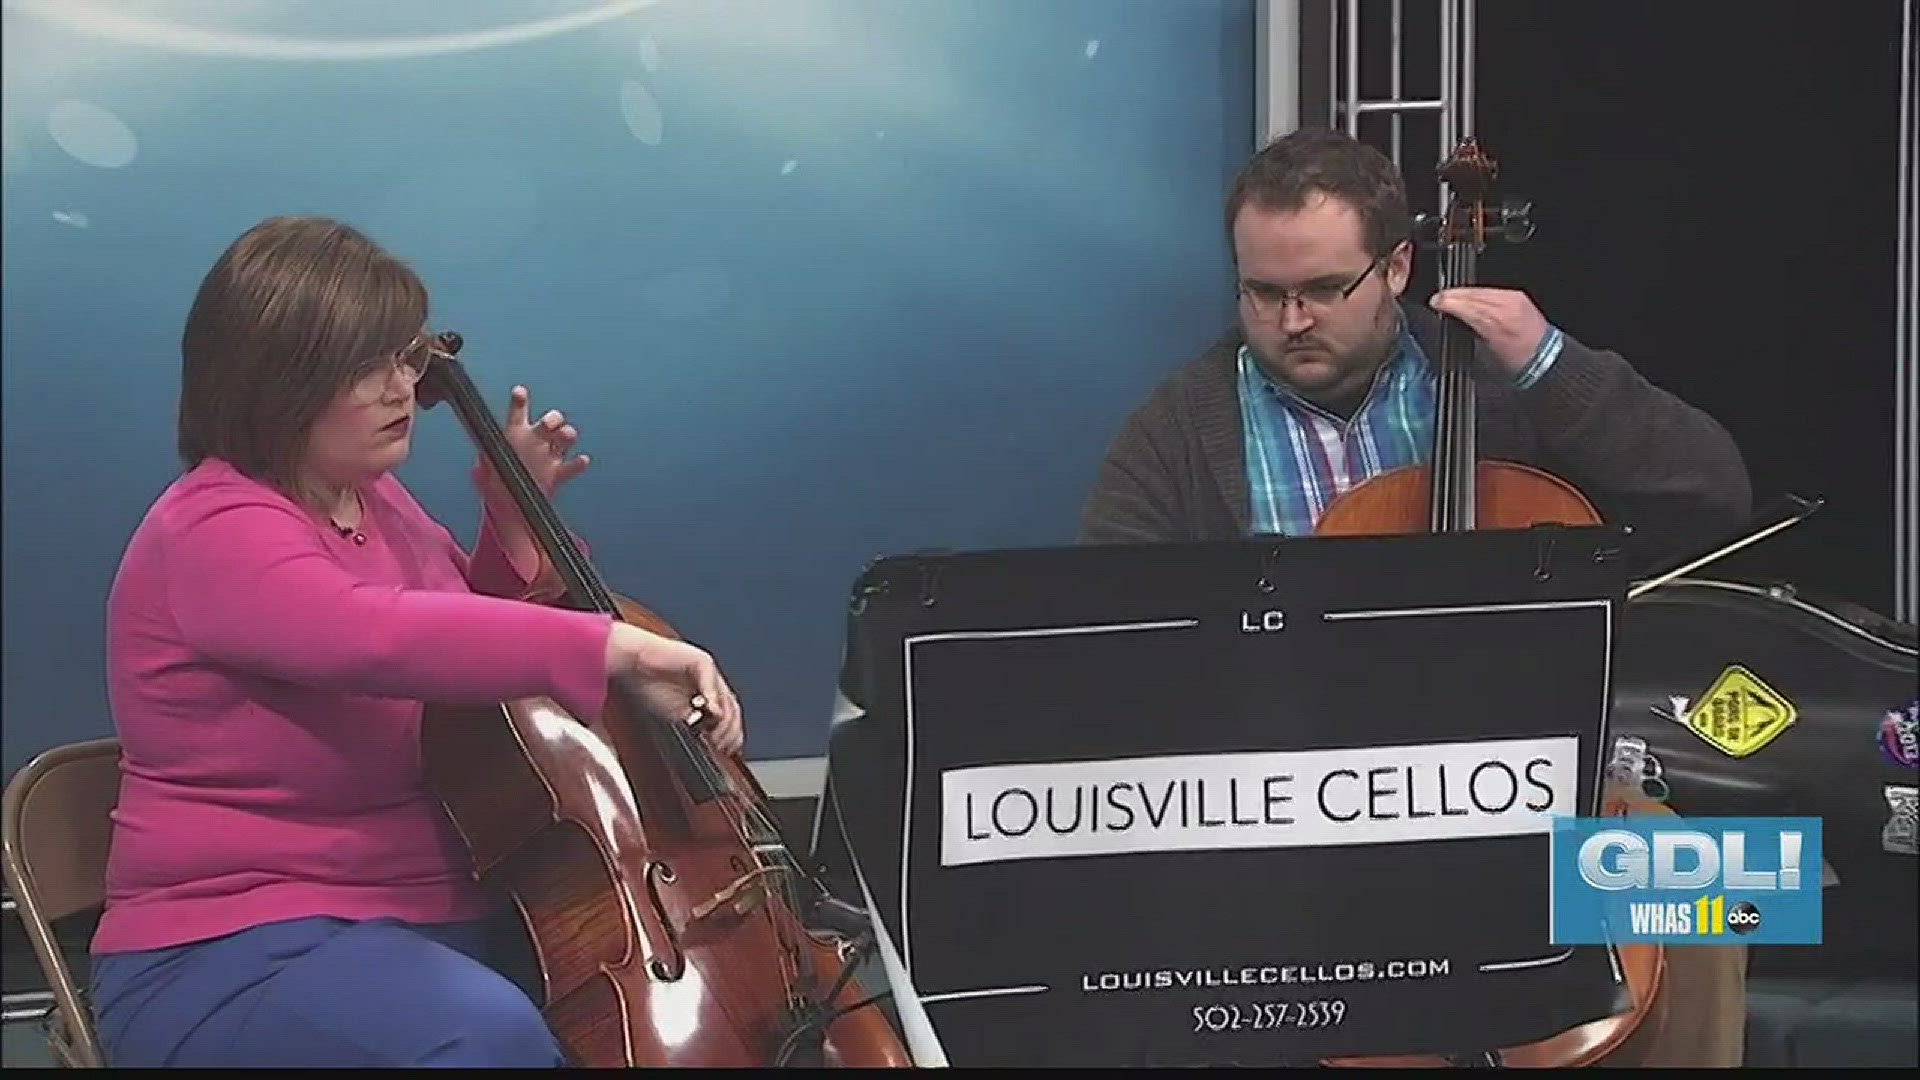 Seth Johnson and Grace Salsman is the duo that makes up Louisville Cello. They perform classic songs with modern twists.